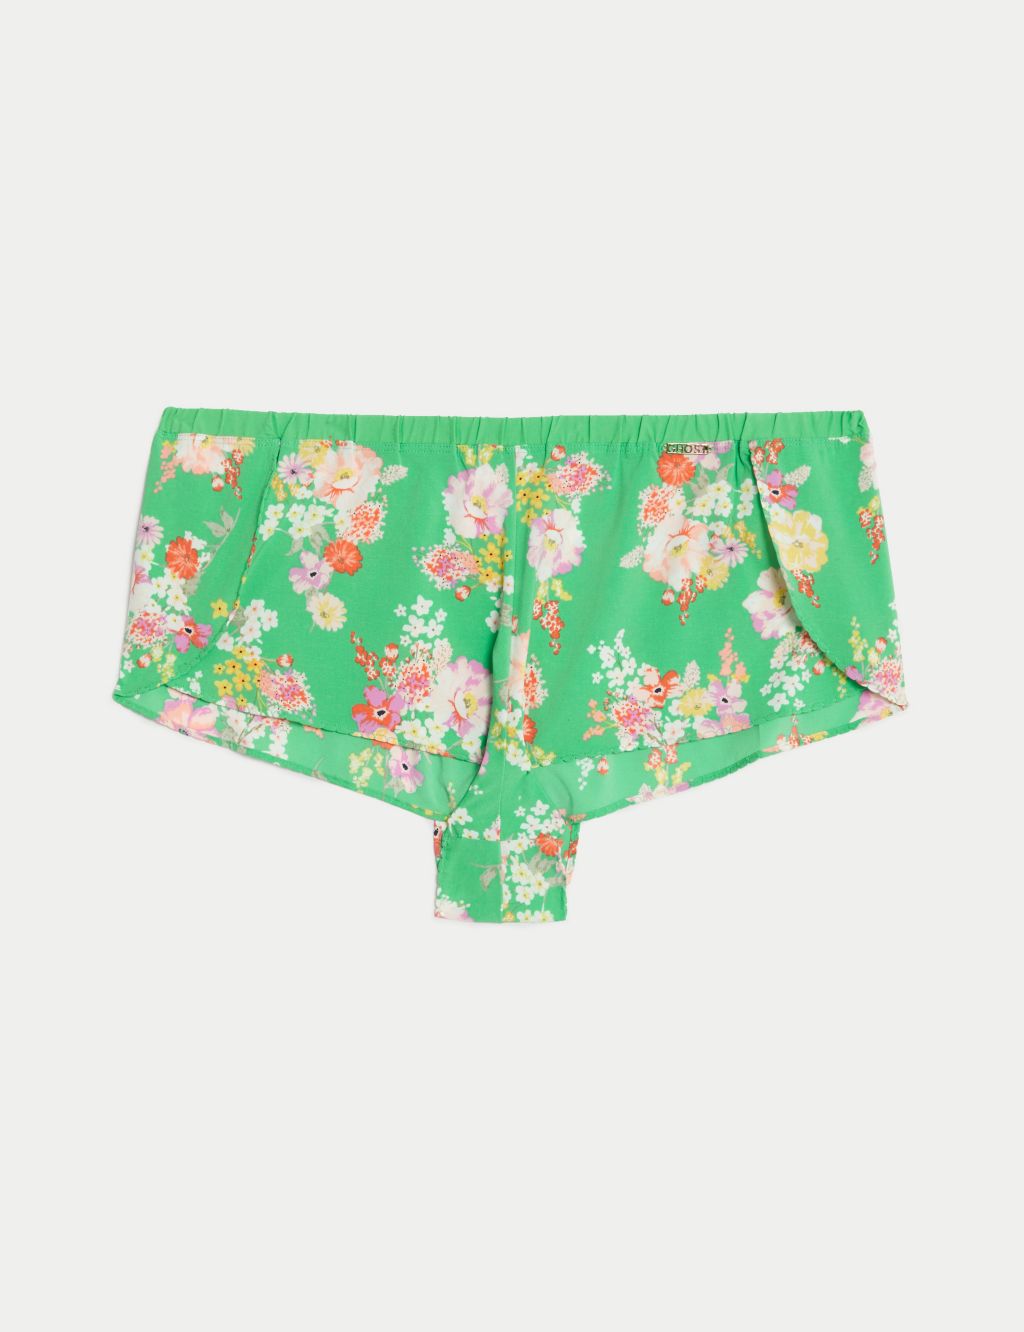 Annie Print High Waisted French Knickers | M&S X GHOST | M&S